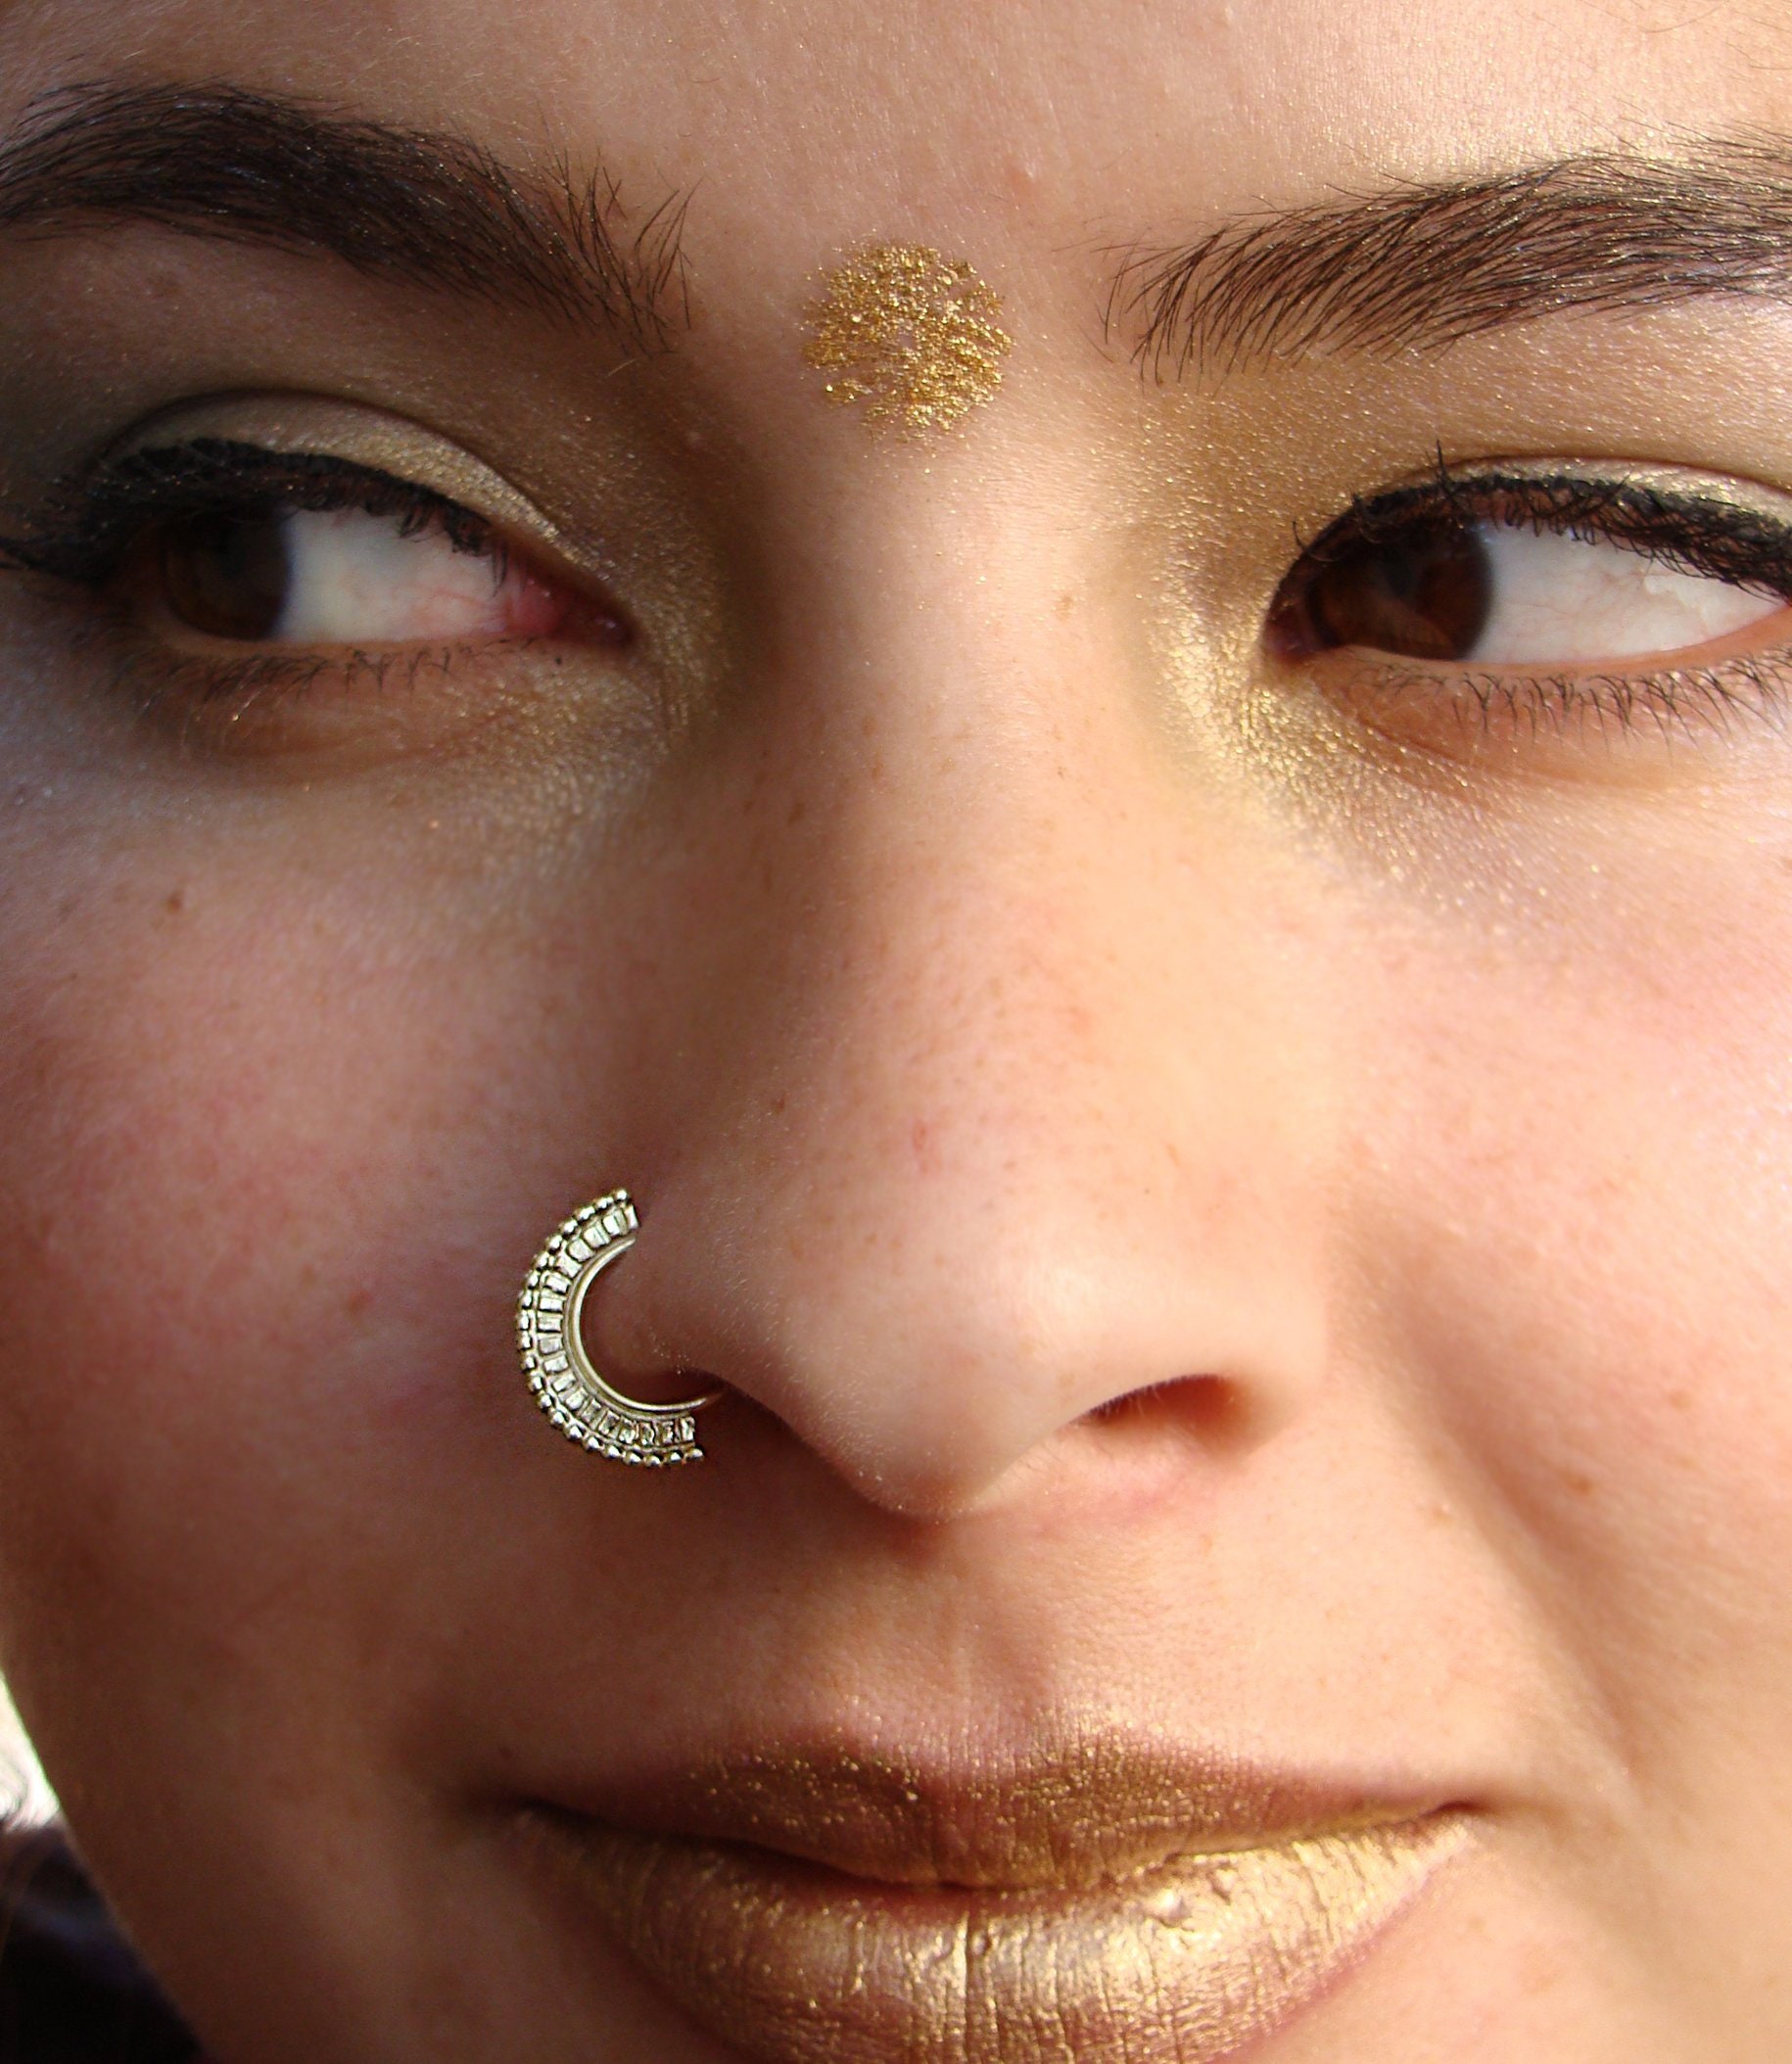 Buy Gold Nose Stud, Gold Nose Ring, Big Nose Piercing, Nose Jewelry, Gold  14k Nose Pin, Nose Screw 22g / 20g / 18g / 16g Bone End, Nostril Stud  Online in India - Etsy